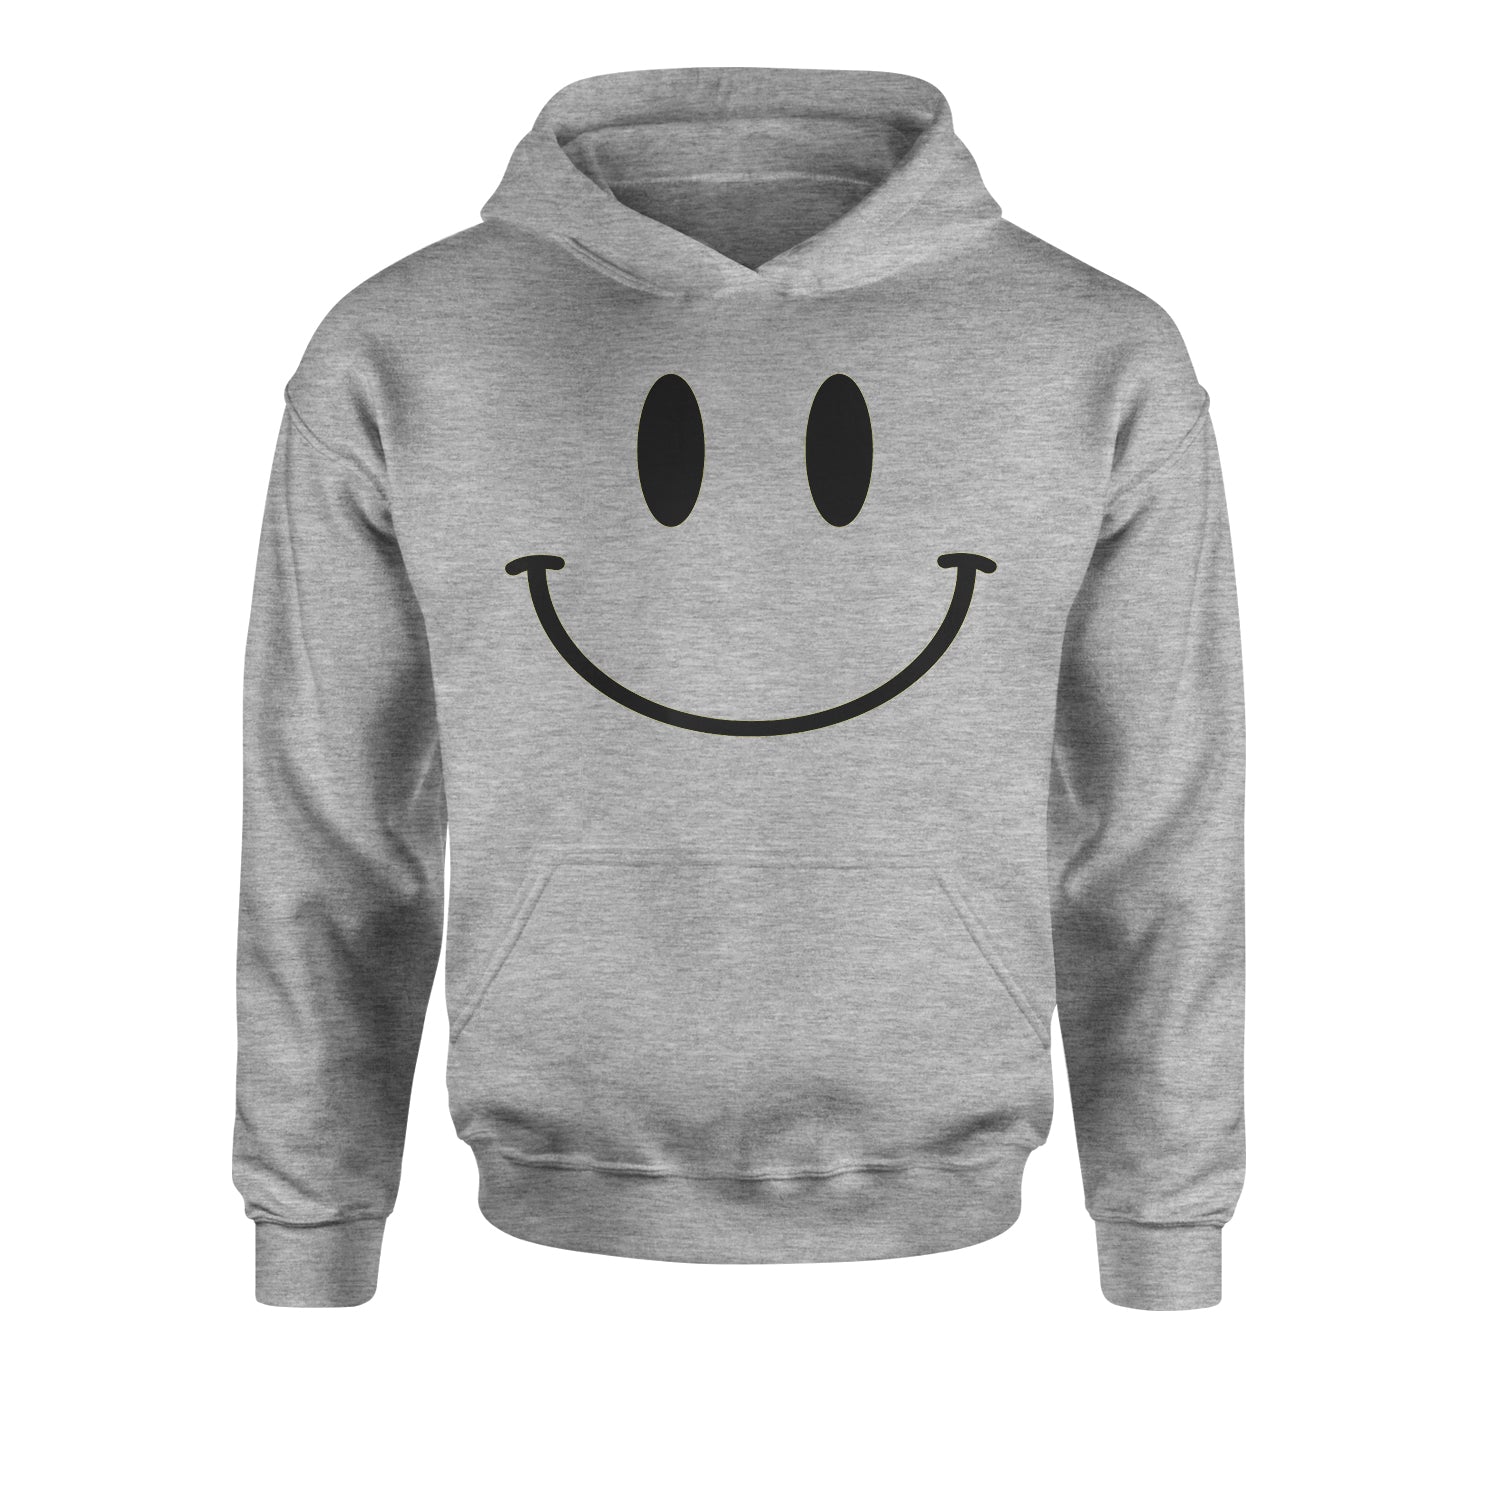 Emoticon Big Smile Face Youth-Sized Hoodie emoji, emoticon, face, happy, smiley, youth-sized by Expression Tees